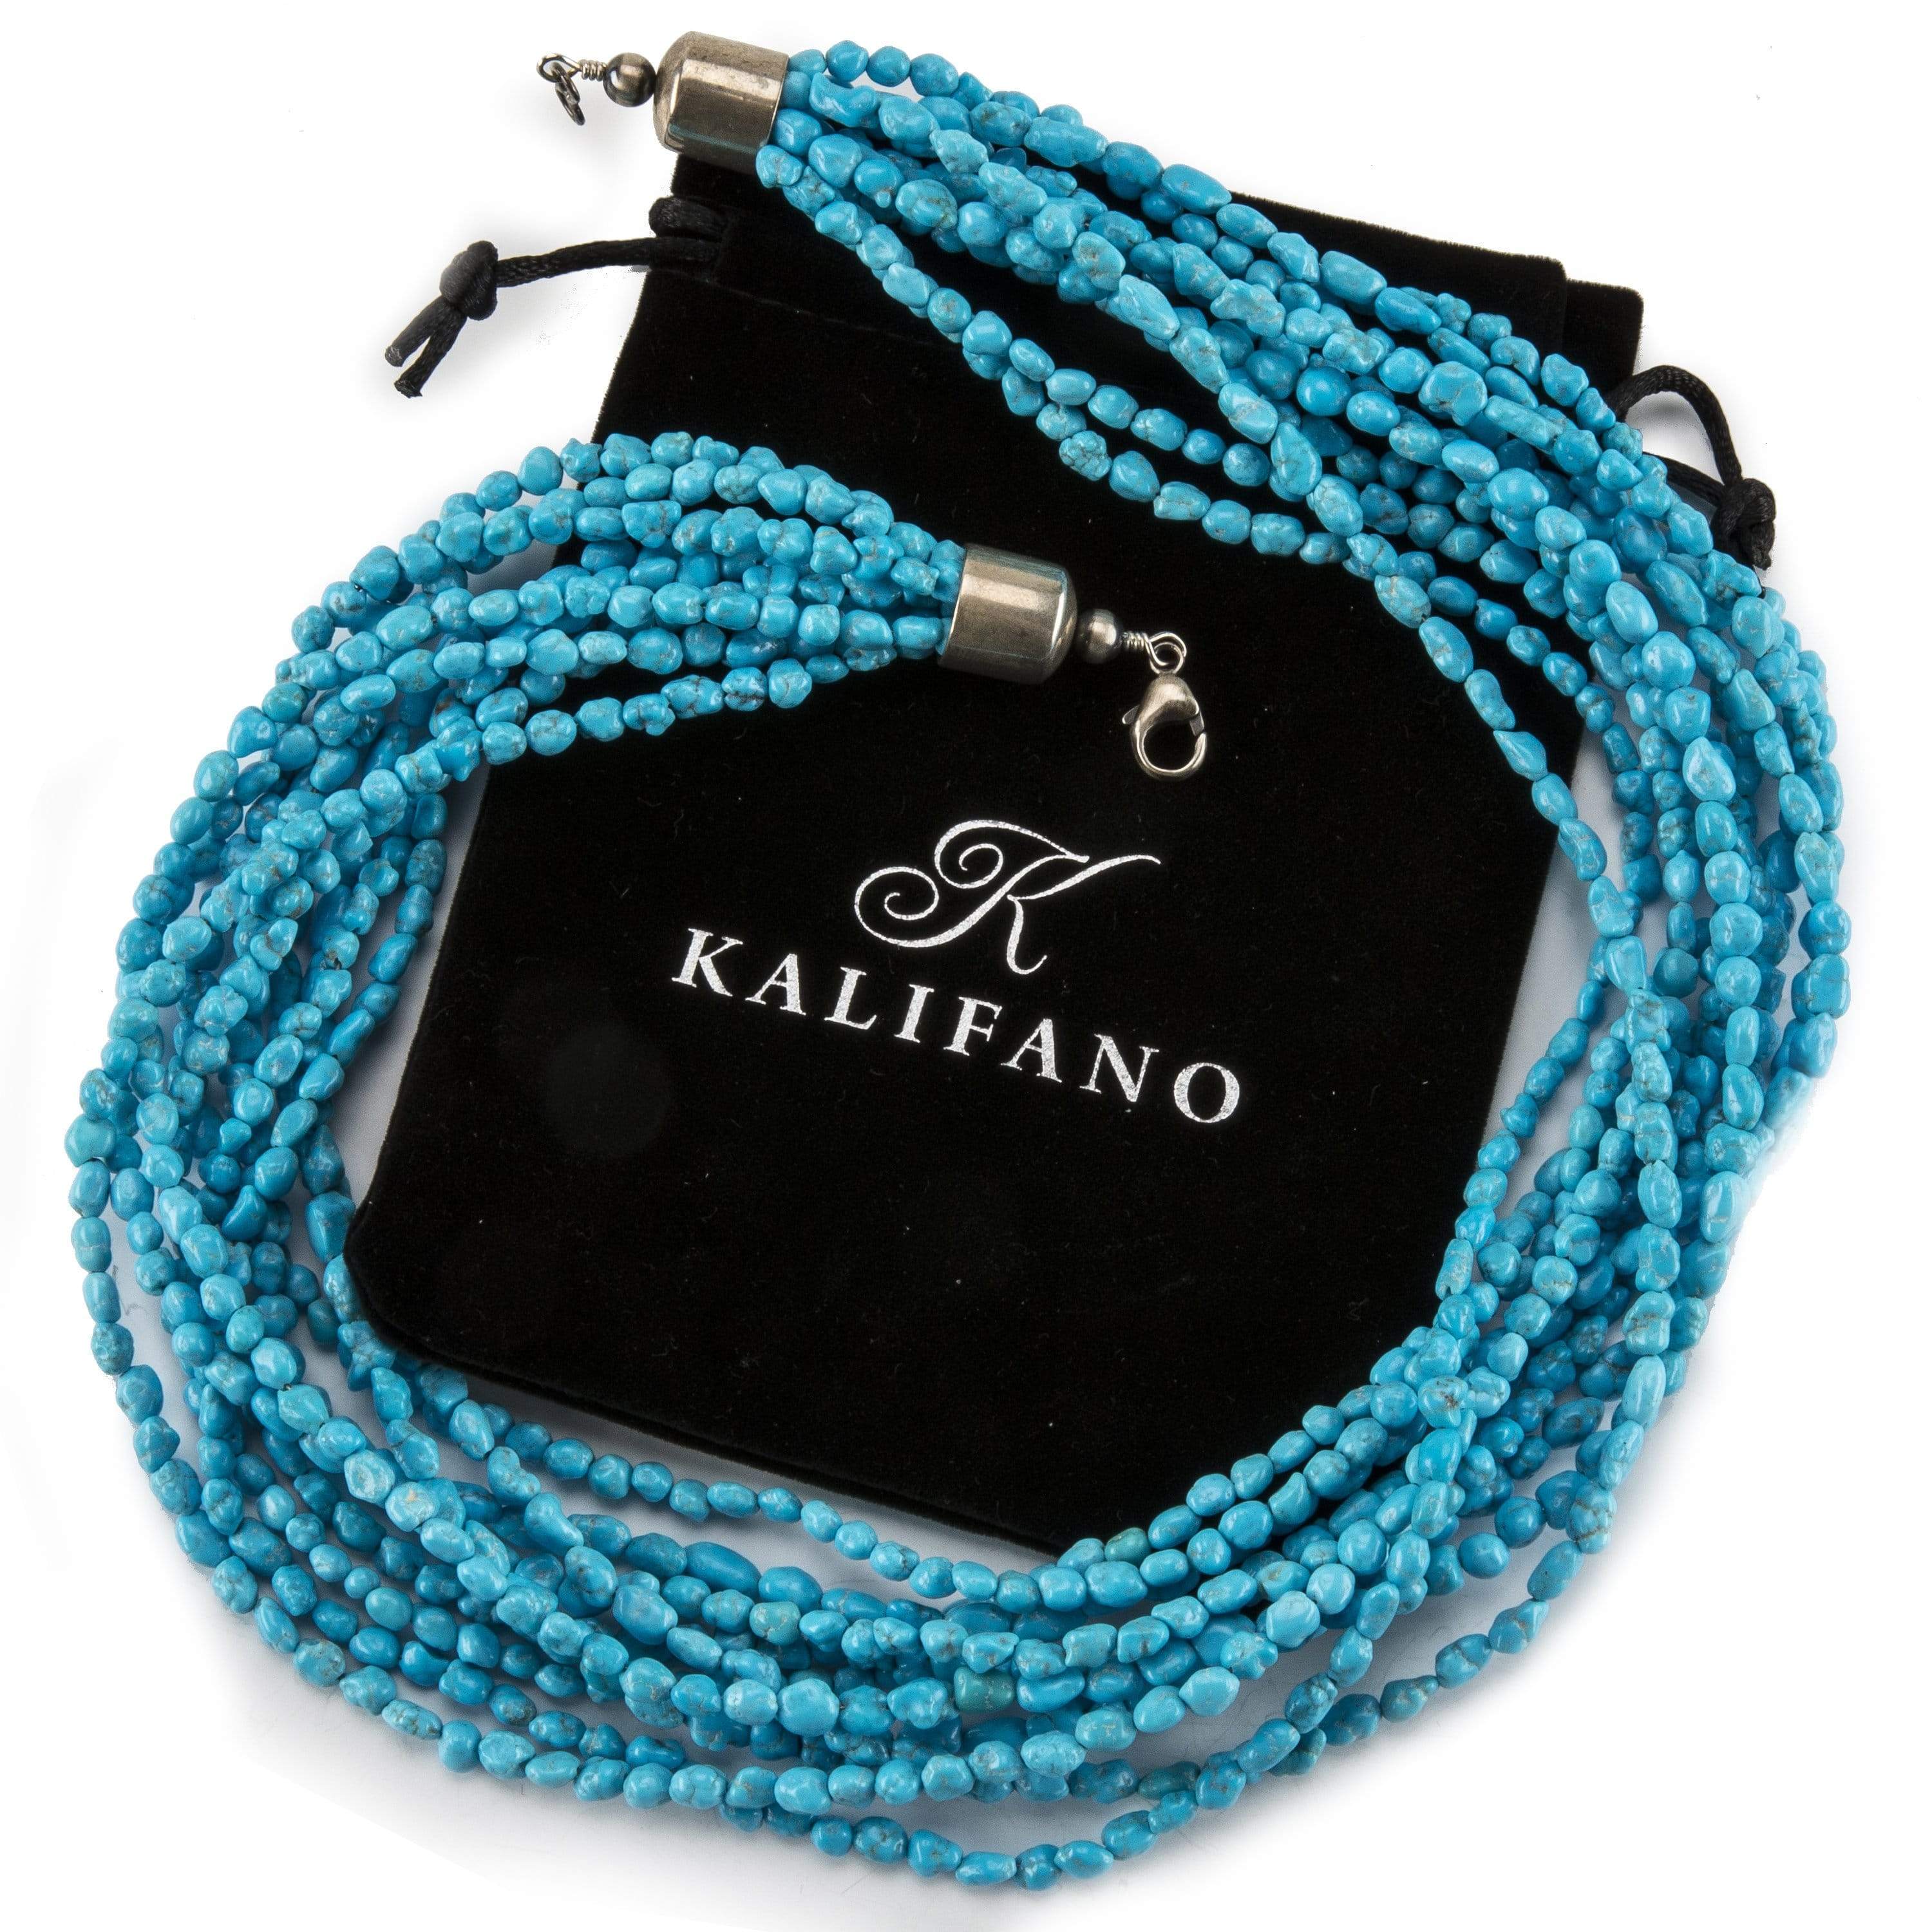 Kalifano Native American Jewelry 23" Ten Strand Genuine Turquoise USA Native American Made 925 Sterling Silver Necklace NAN2400.005